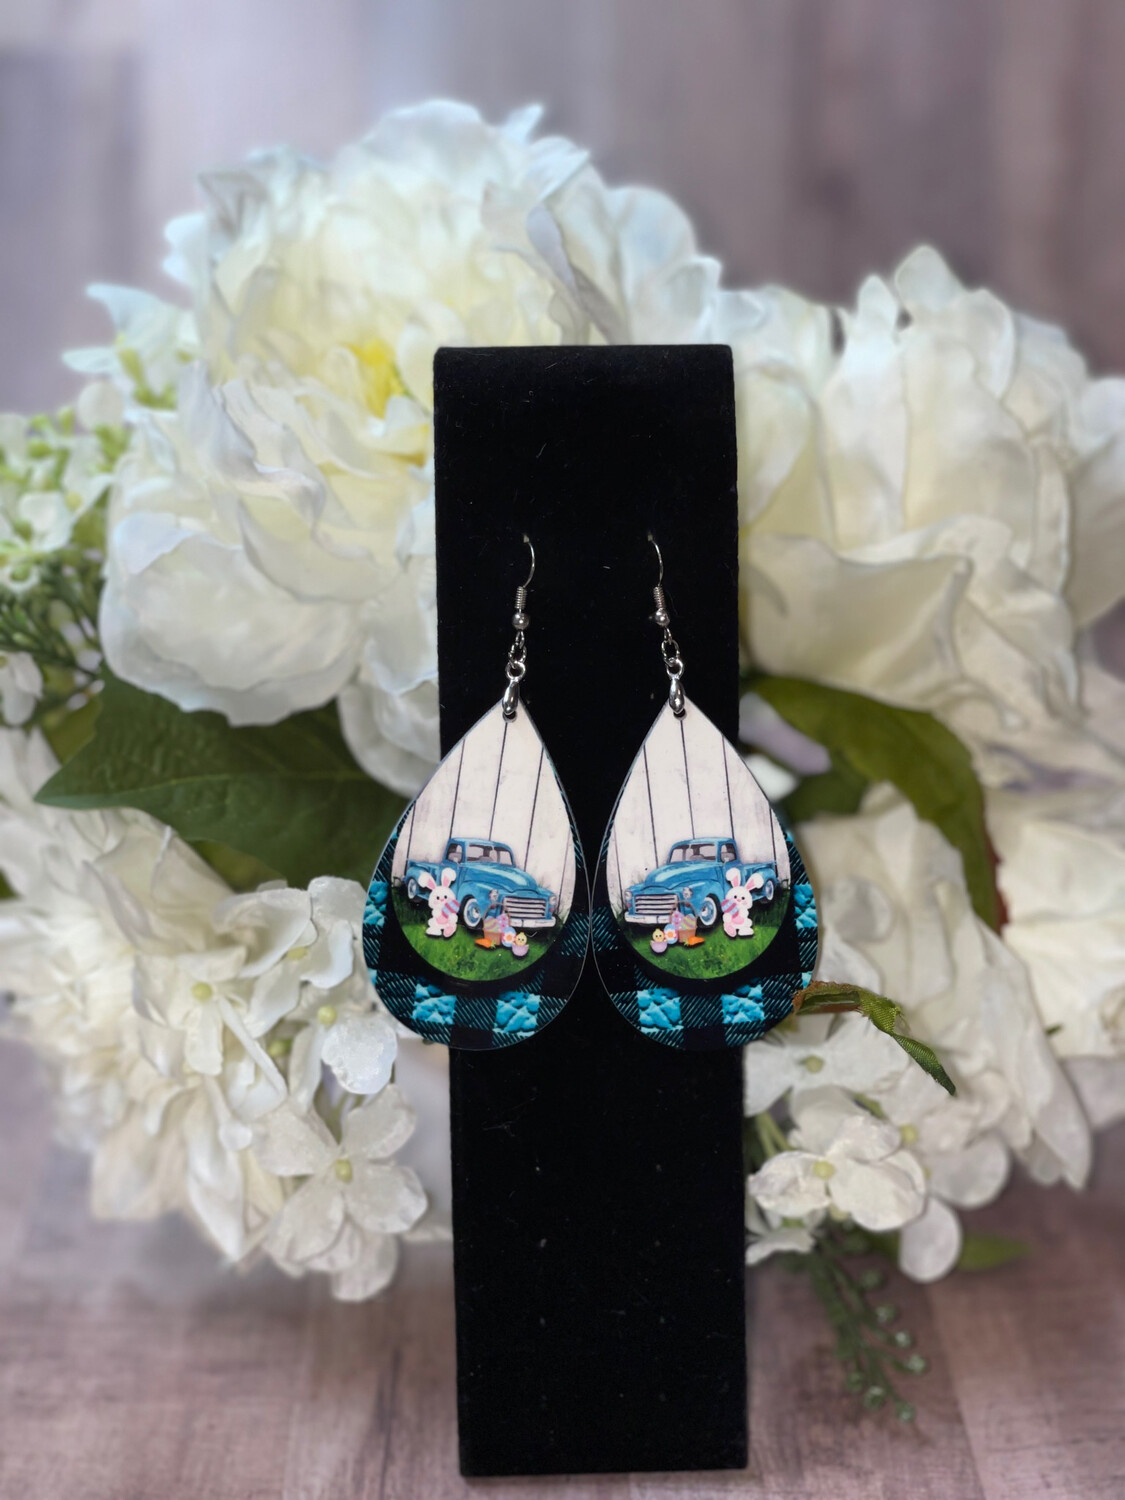 Teal Plaid Easter Bunny Earrings With Old Fashioned Truck.